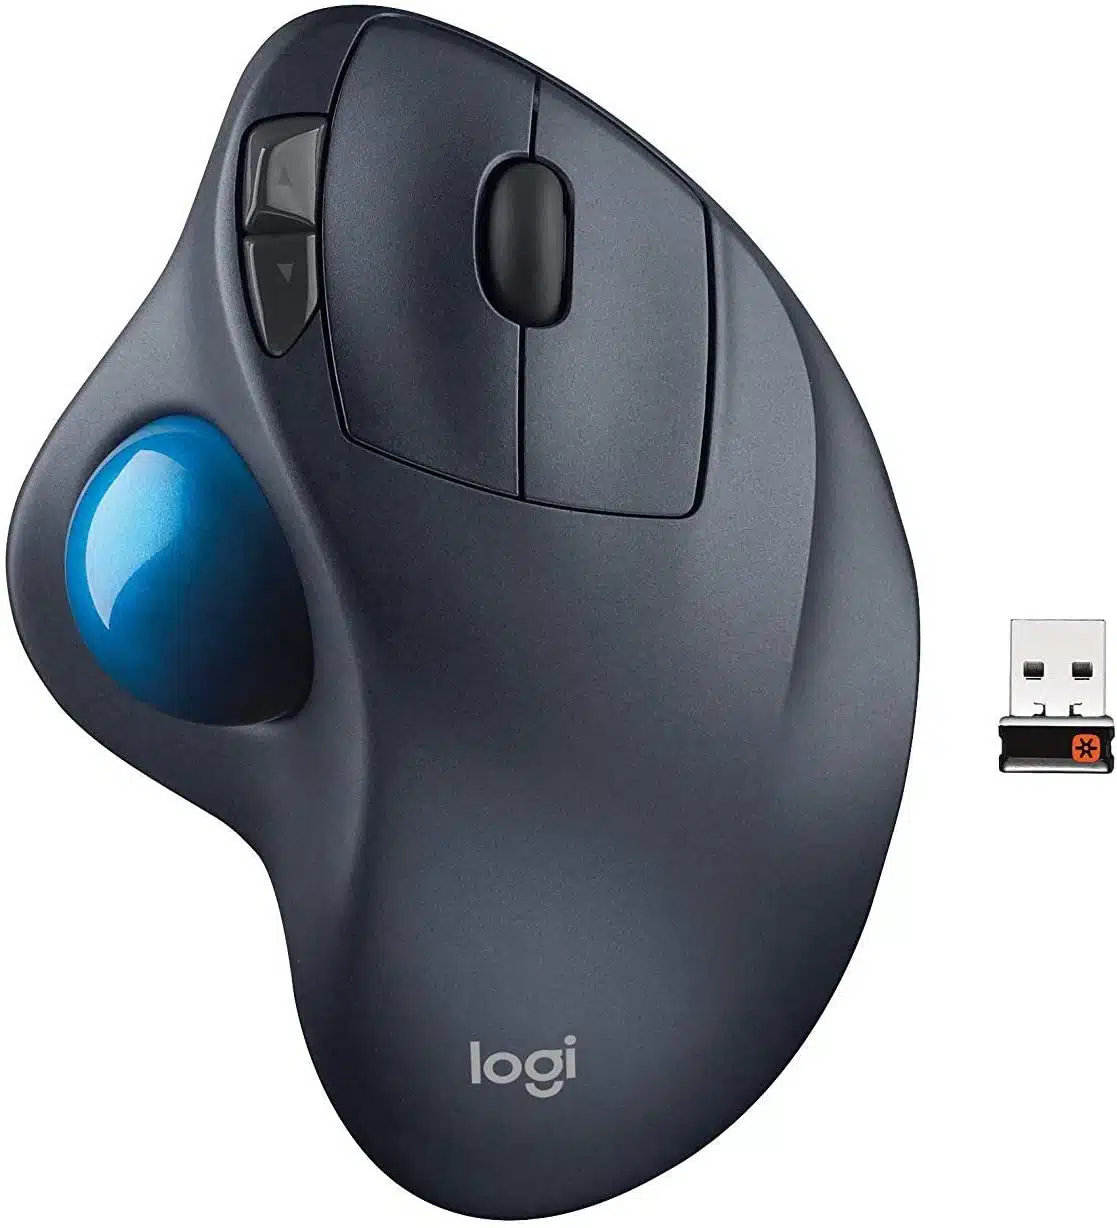 Mouse Driver for Windows 10 64-Bit